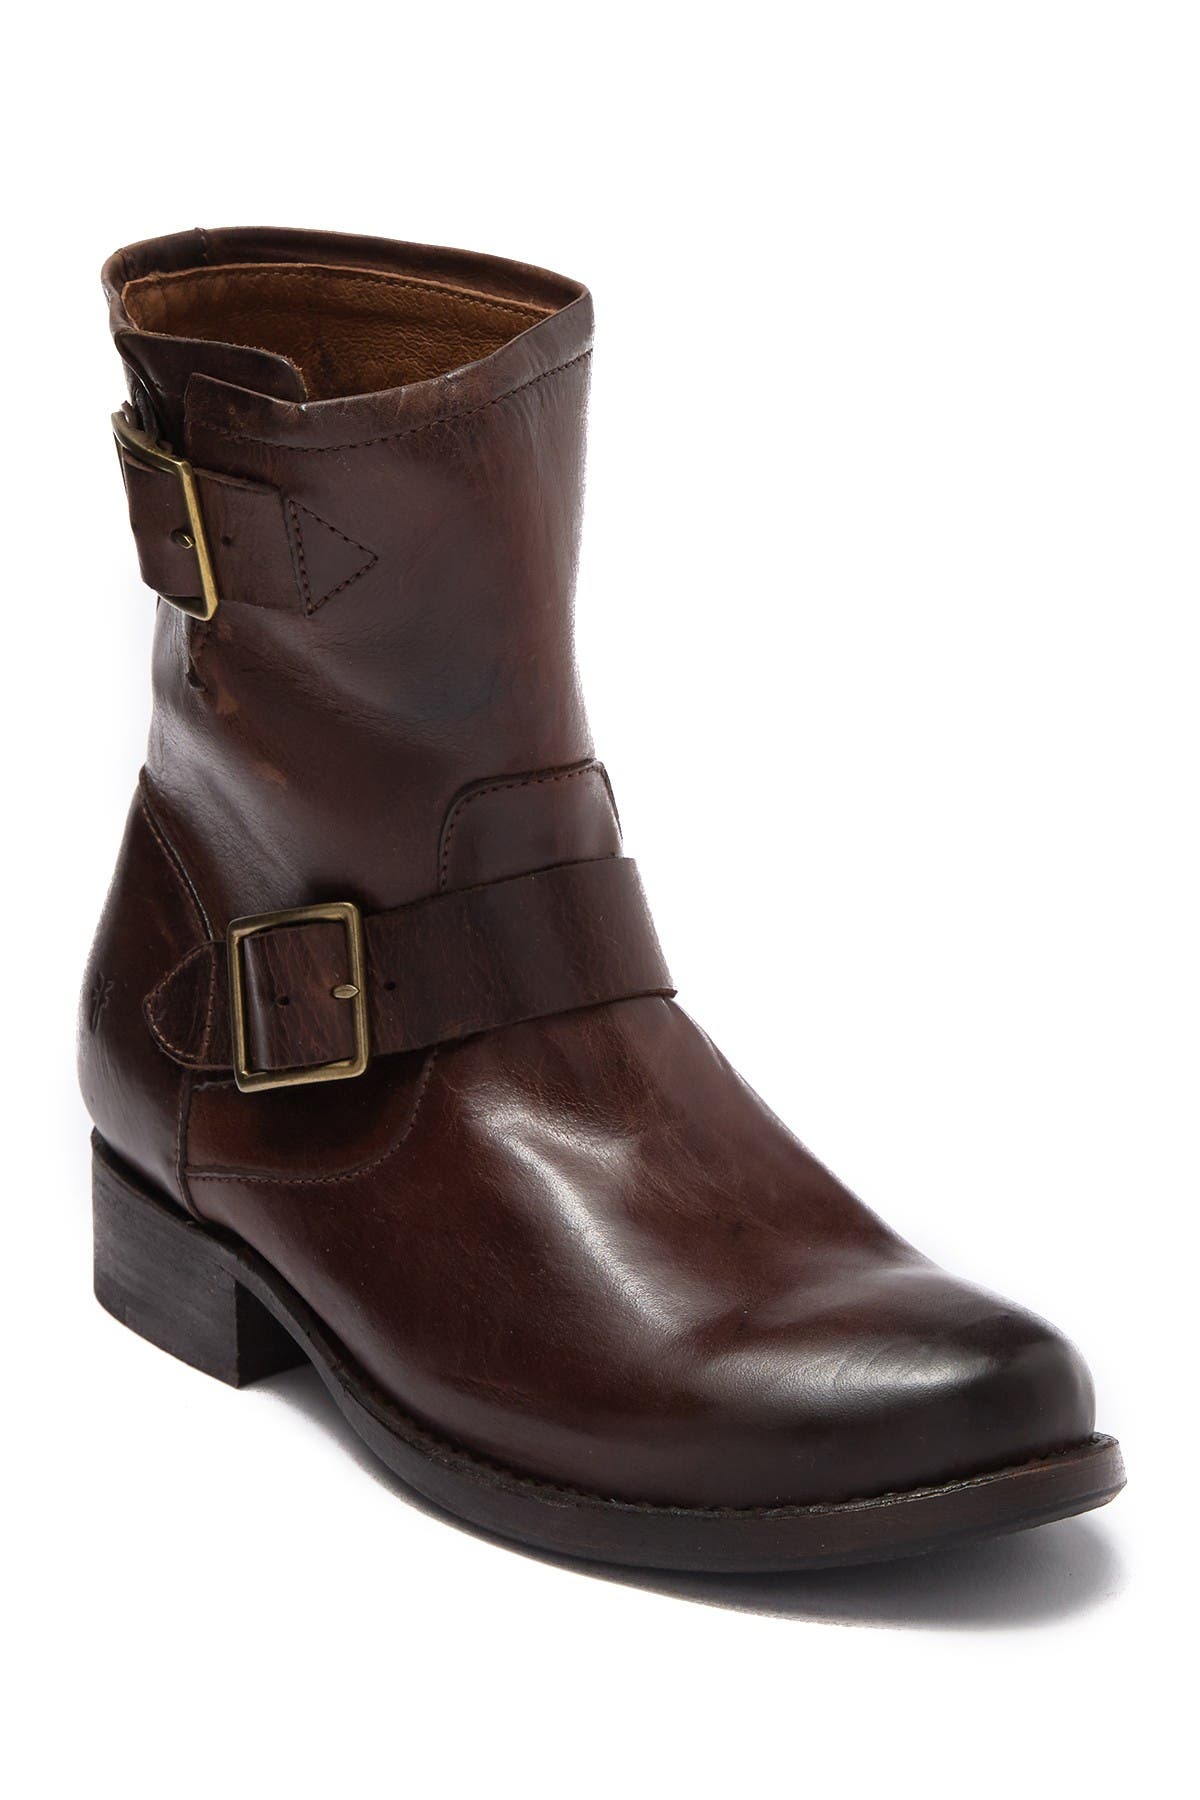 Frye | Vicky Engineer Leather Boot 